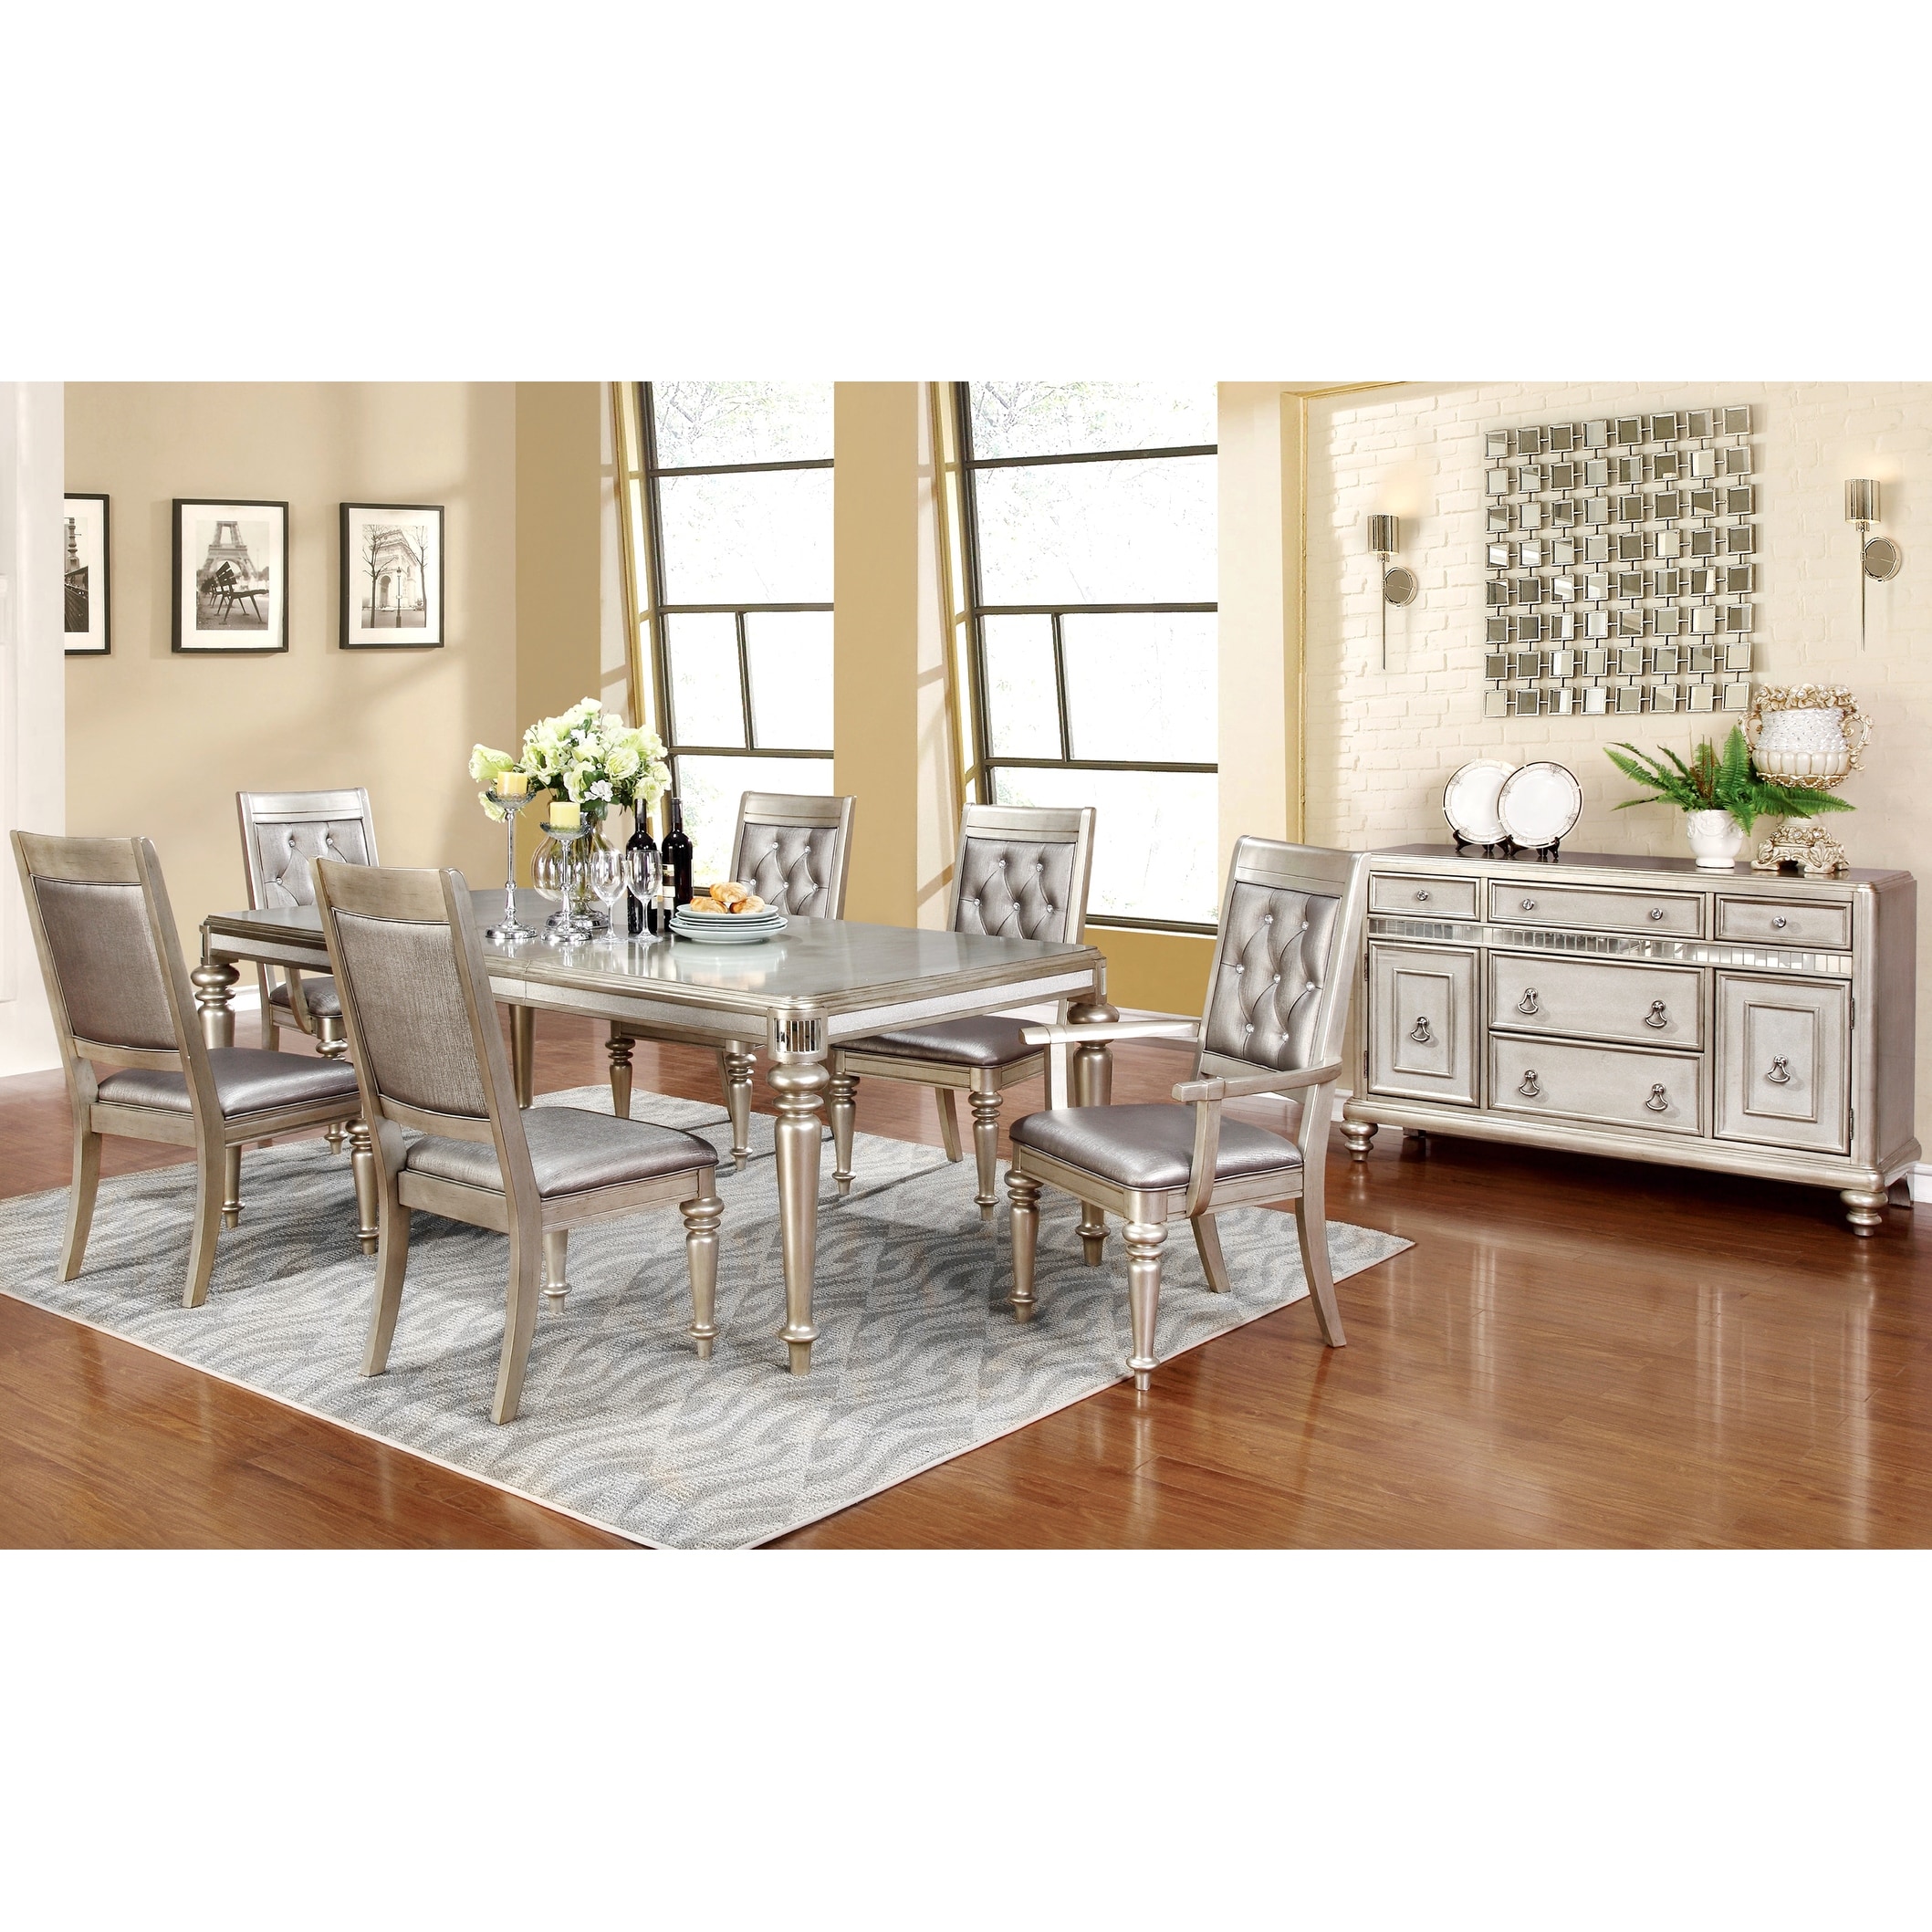 Metallic Platinum Wood Dining Set With Tufted Chairs And Buffet Server